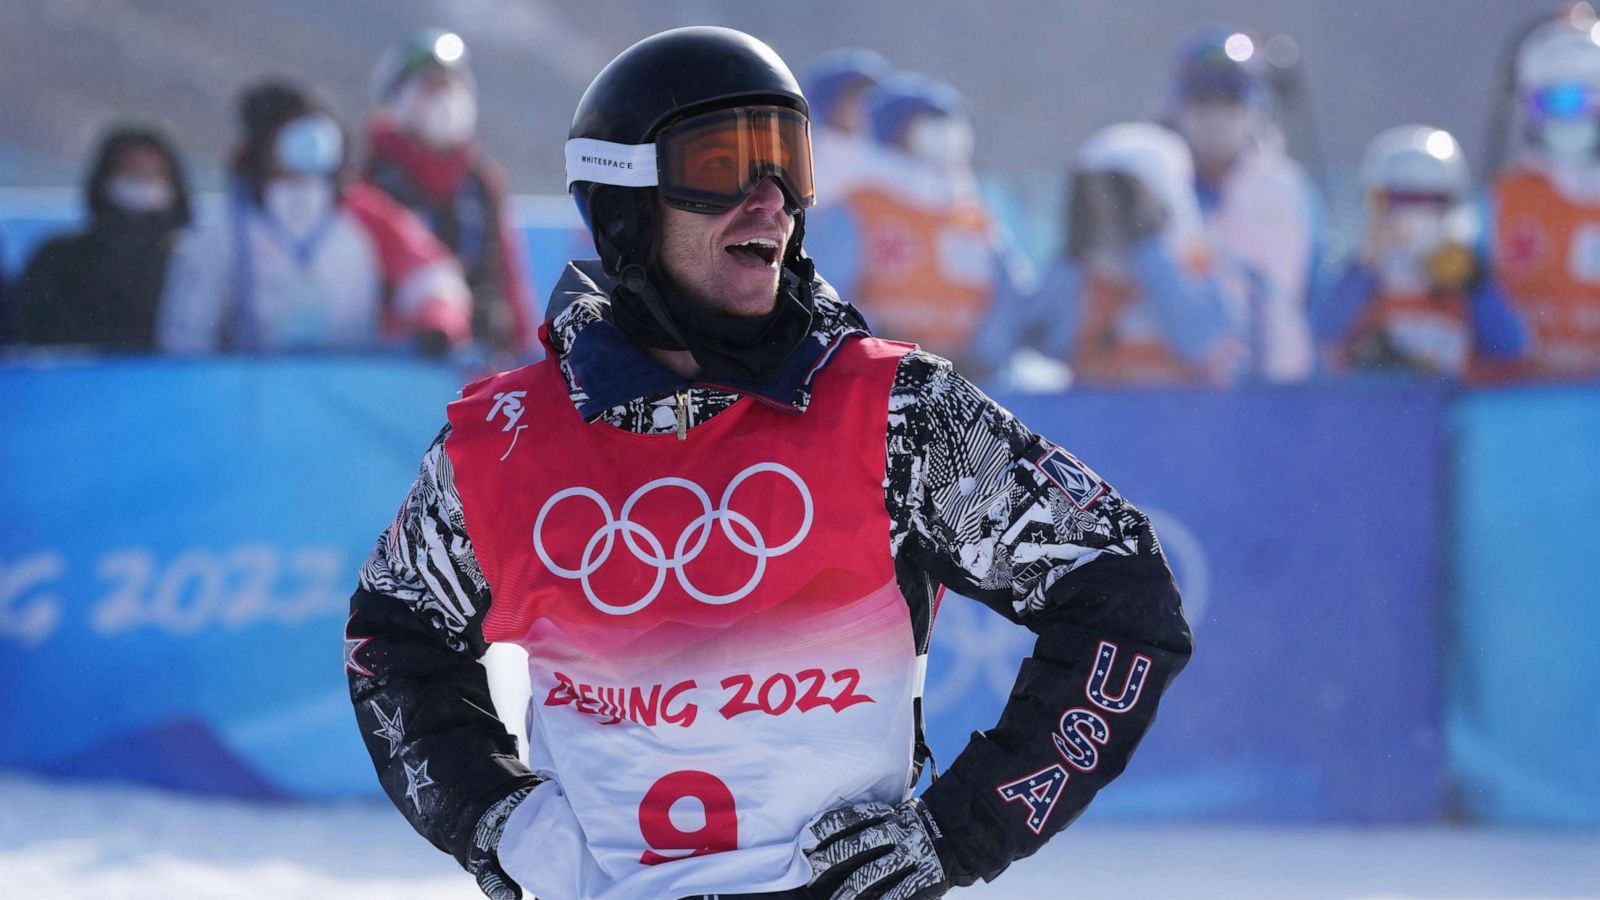 Shaun White Wins Third Straight Gold in X Games Superpipe - The